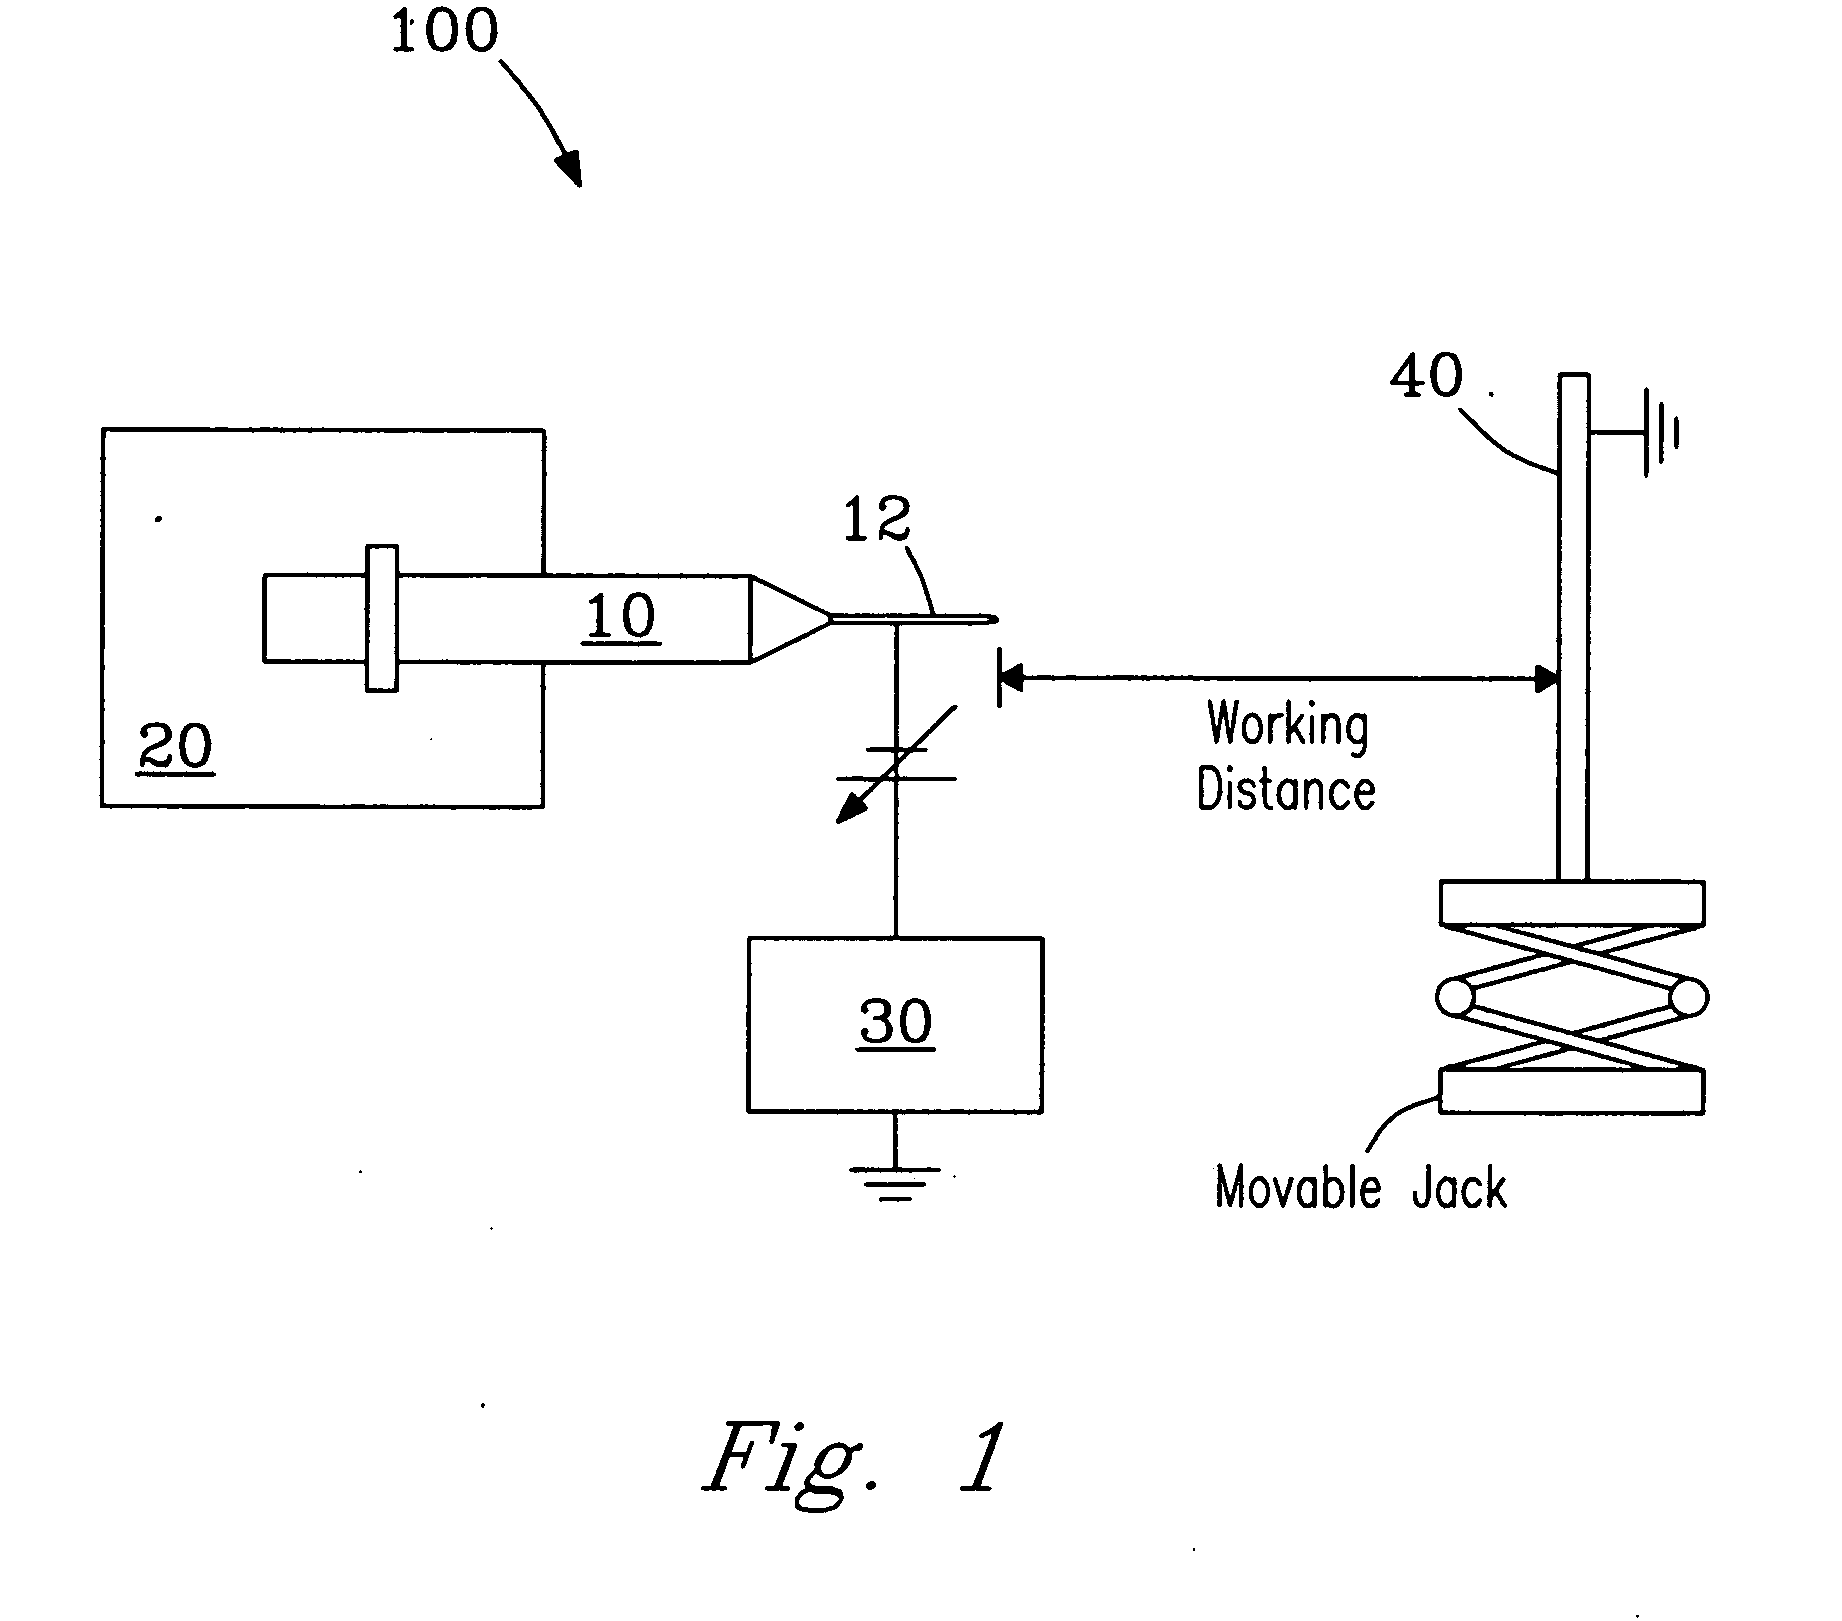 Process for preparing high stability, high activity materials and processes for using same